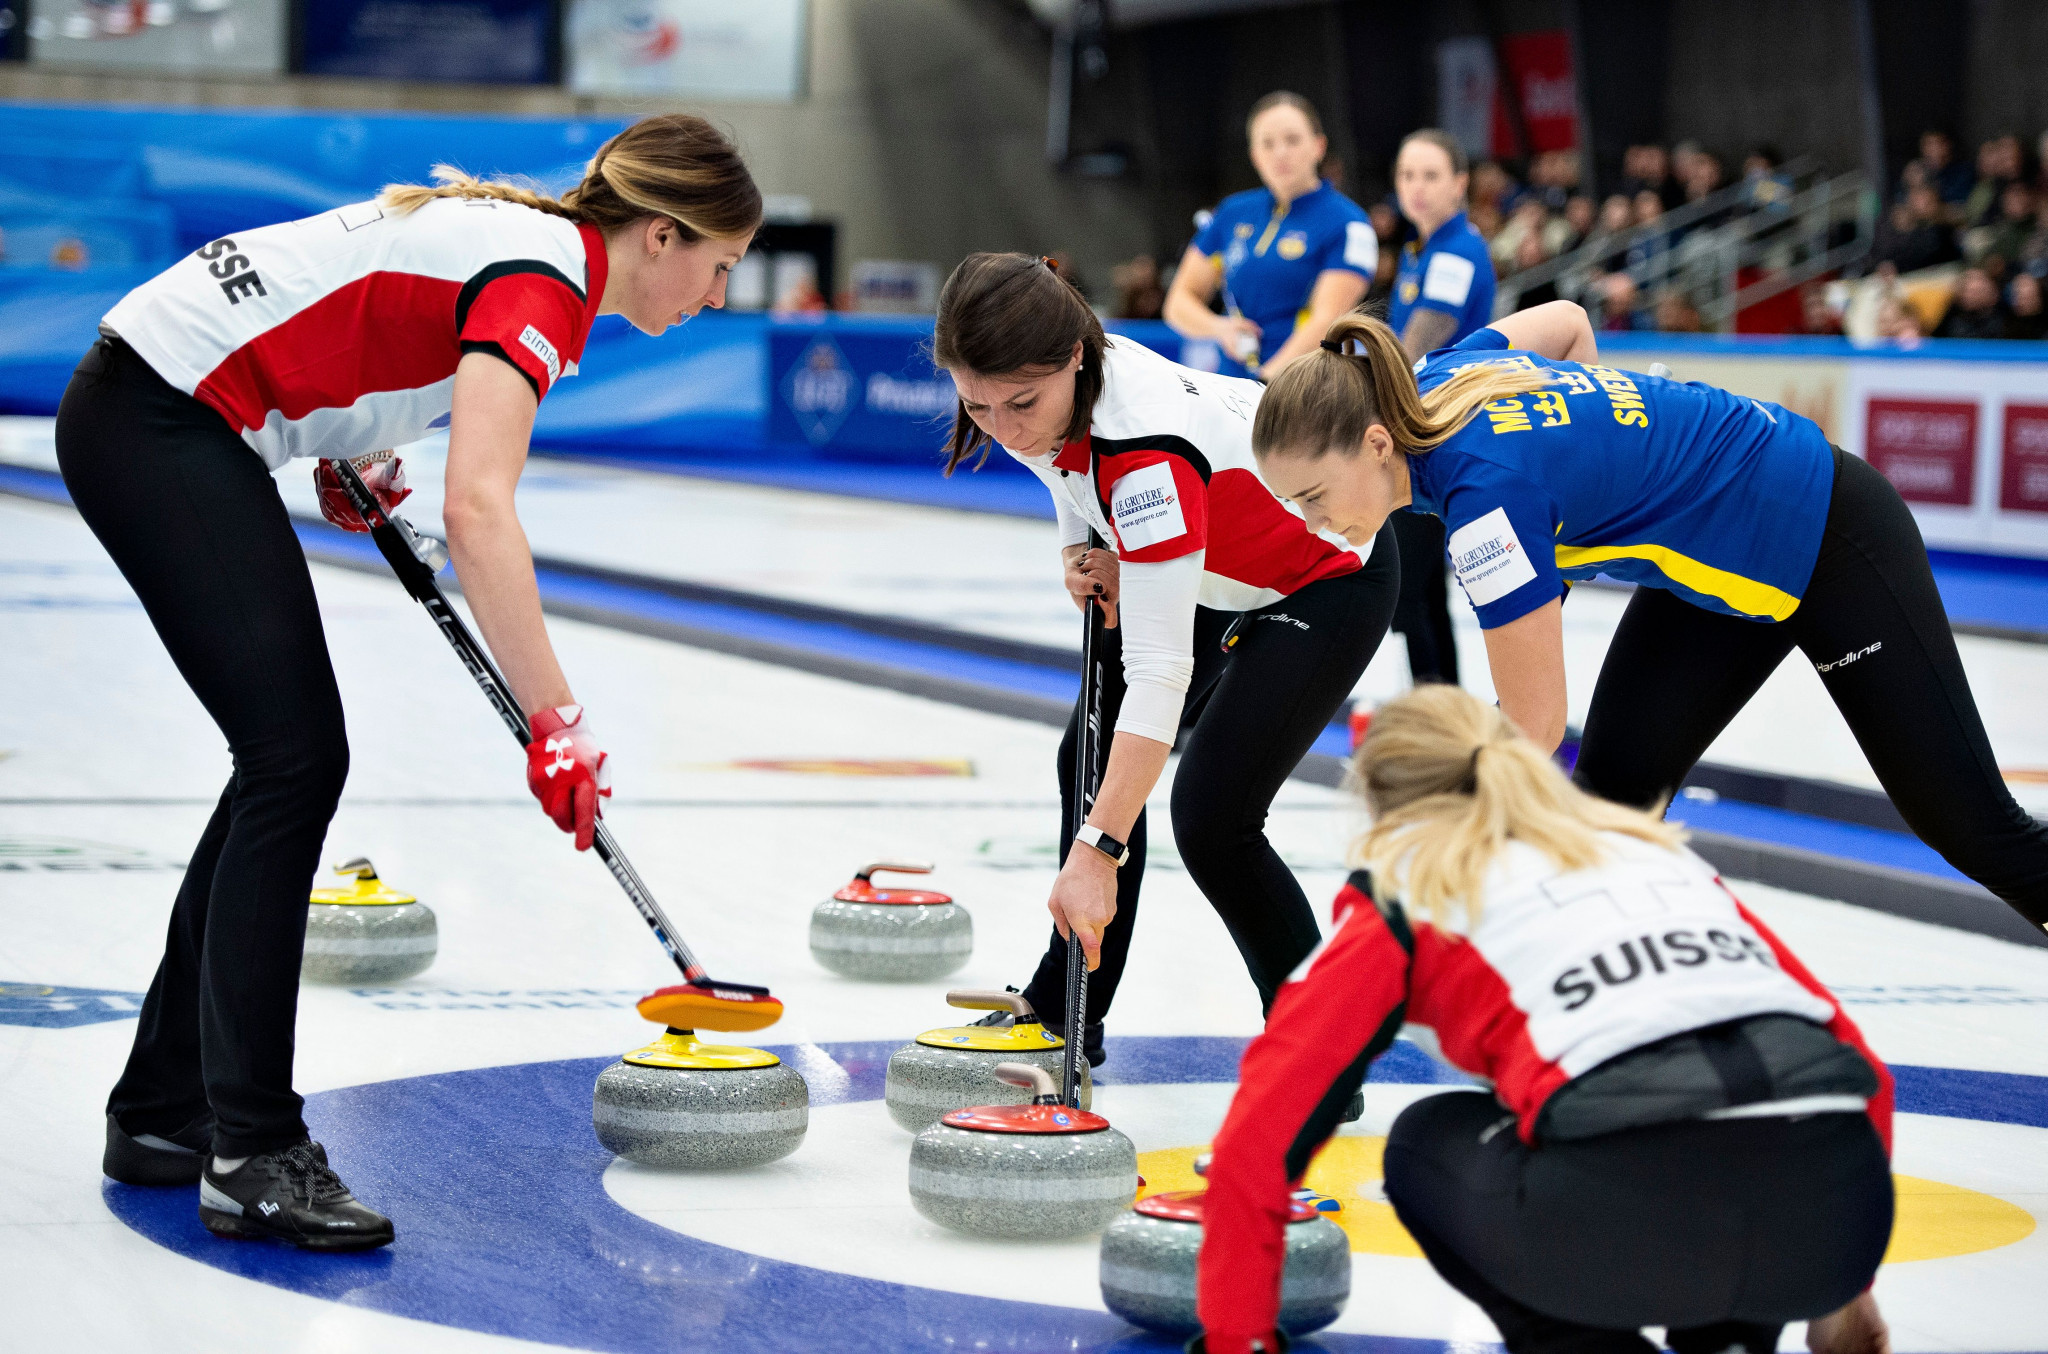 World Curling Federation to create new team ranking system